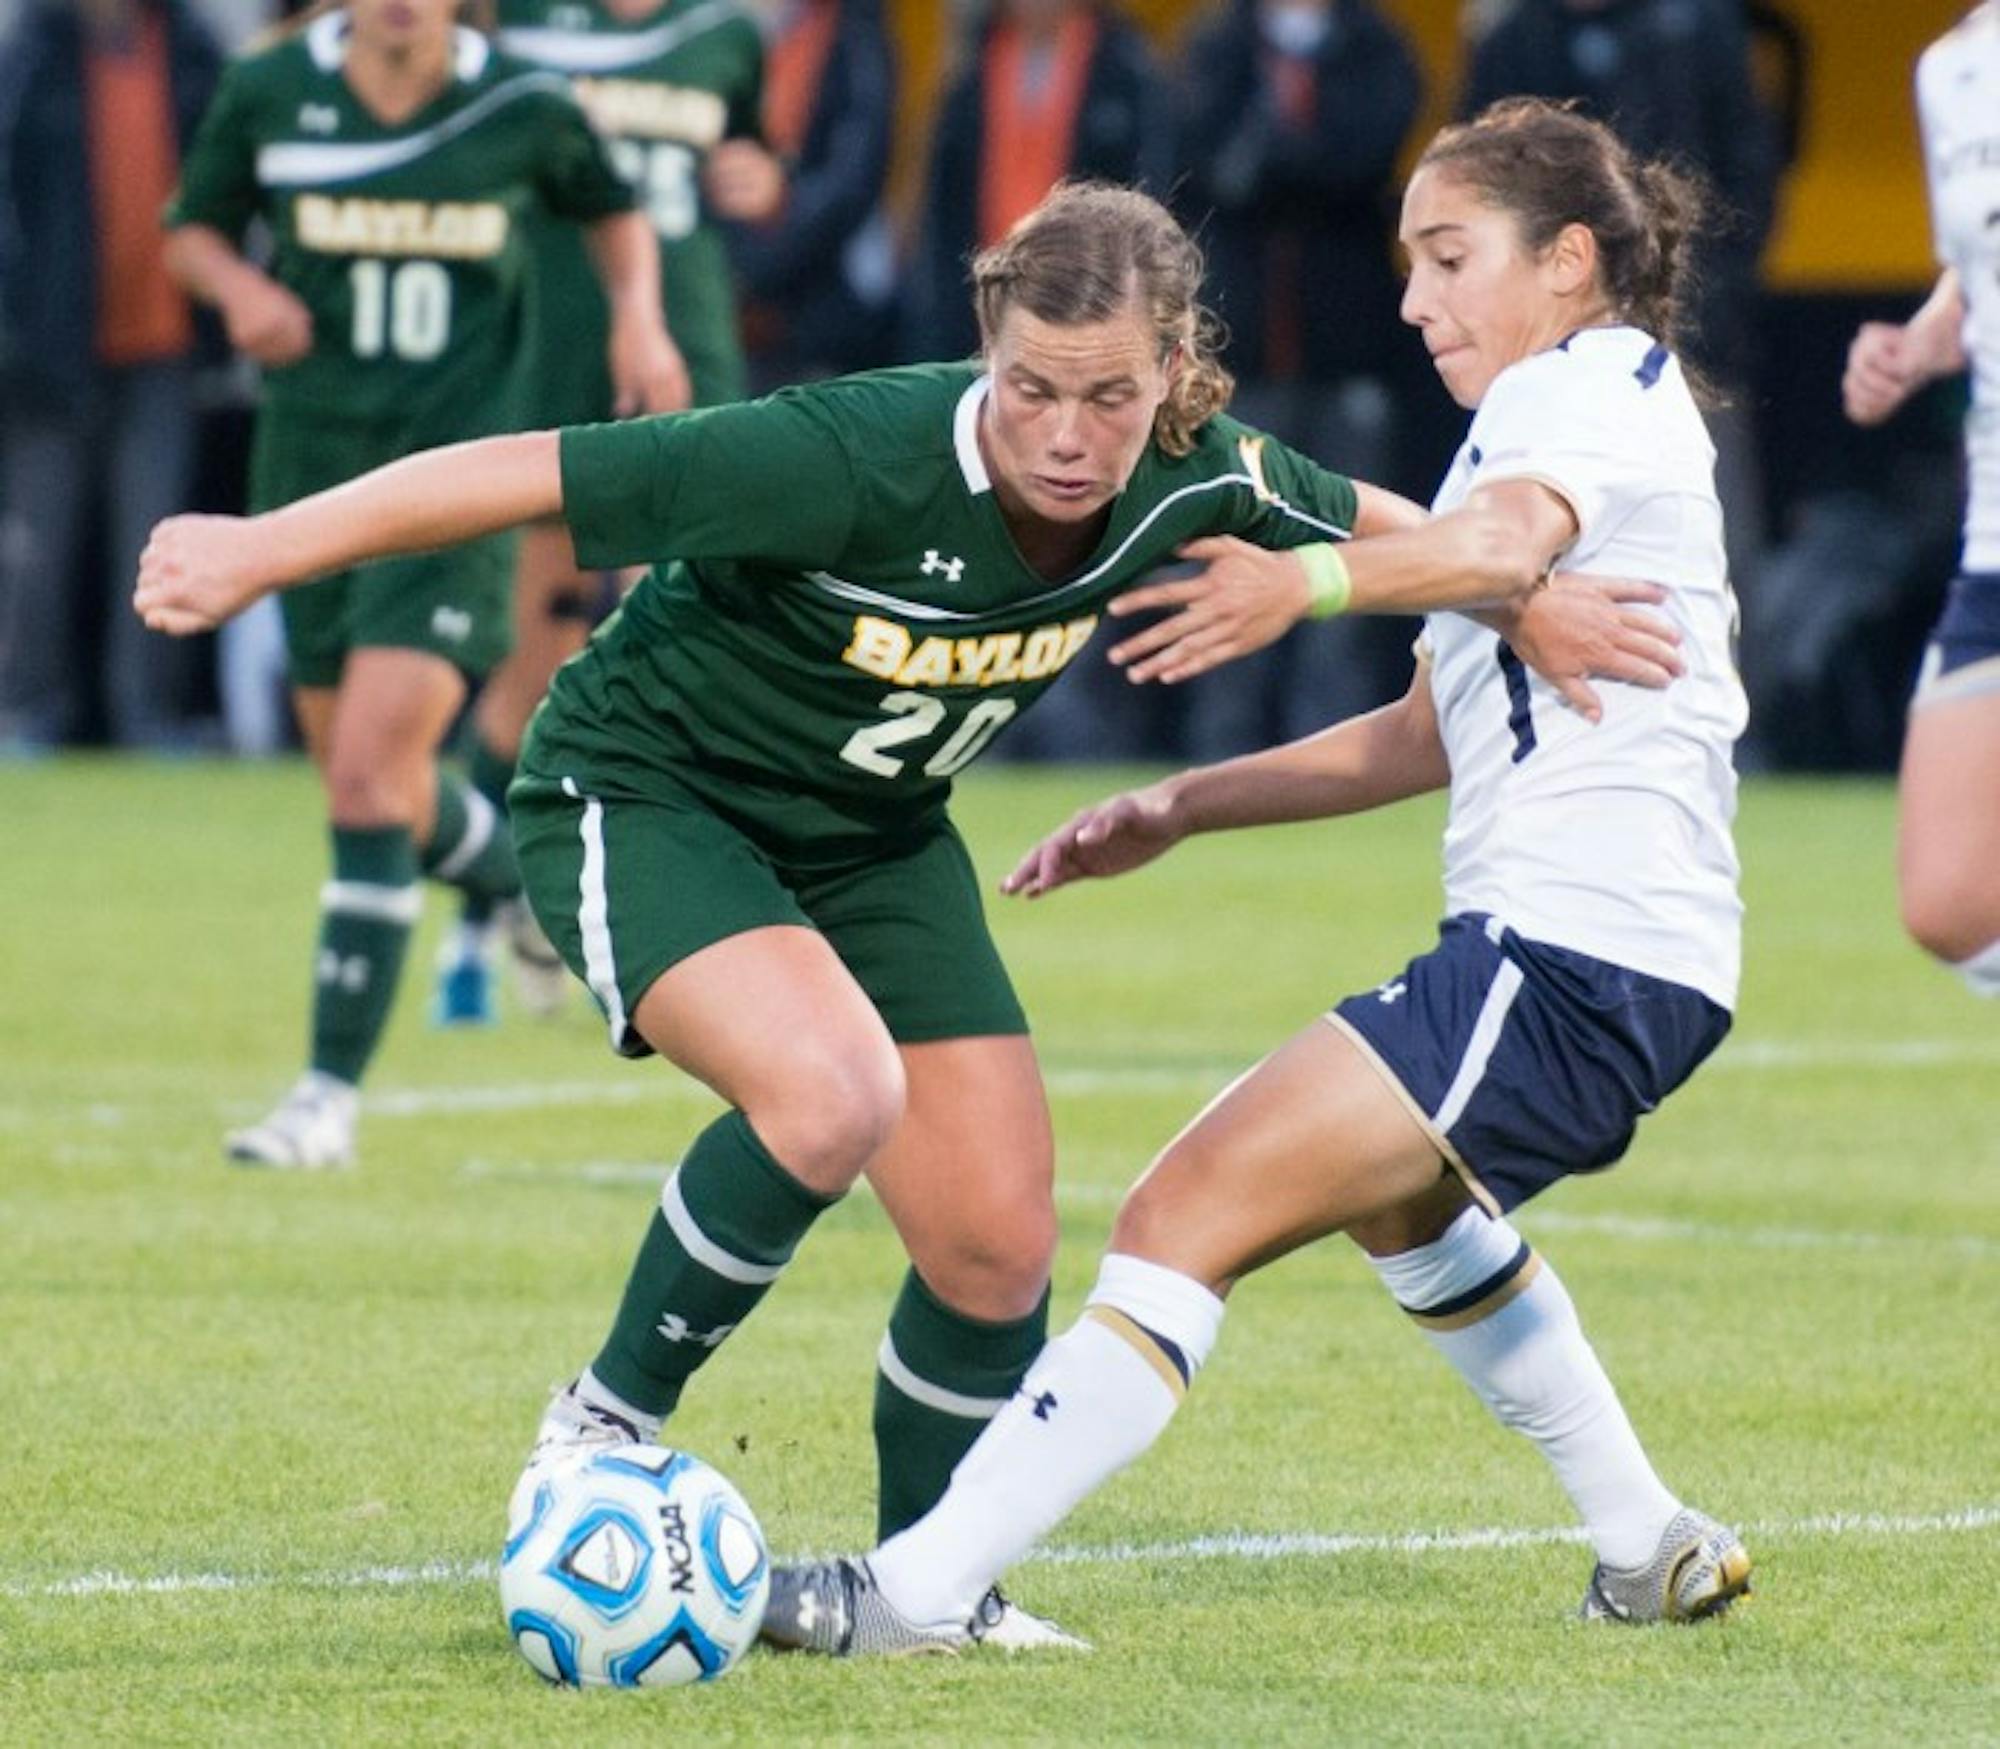 Irish freshman defender Sabrina Flores tangles with a Baylor forward during Notre Dame’s 1-0 win over the Bears on Sept. 12.